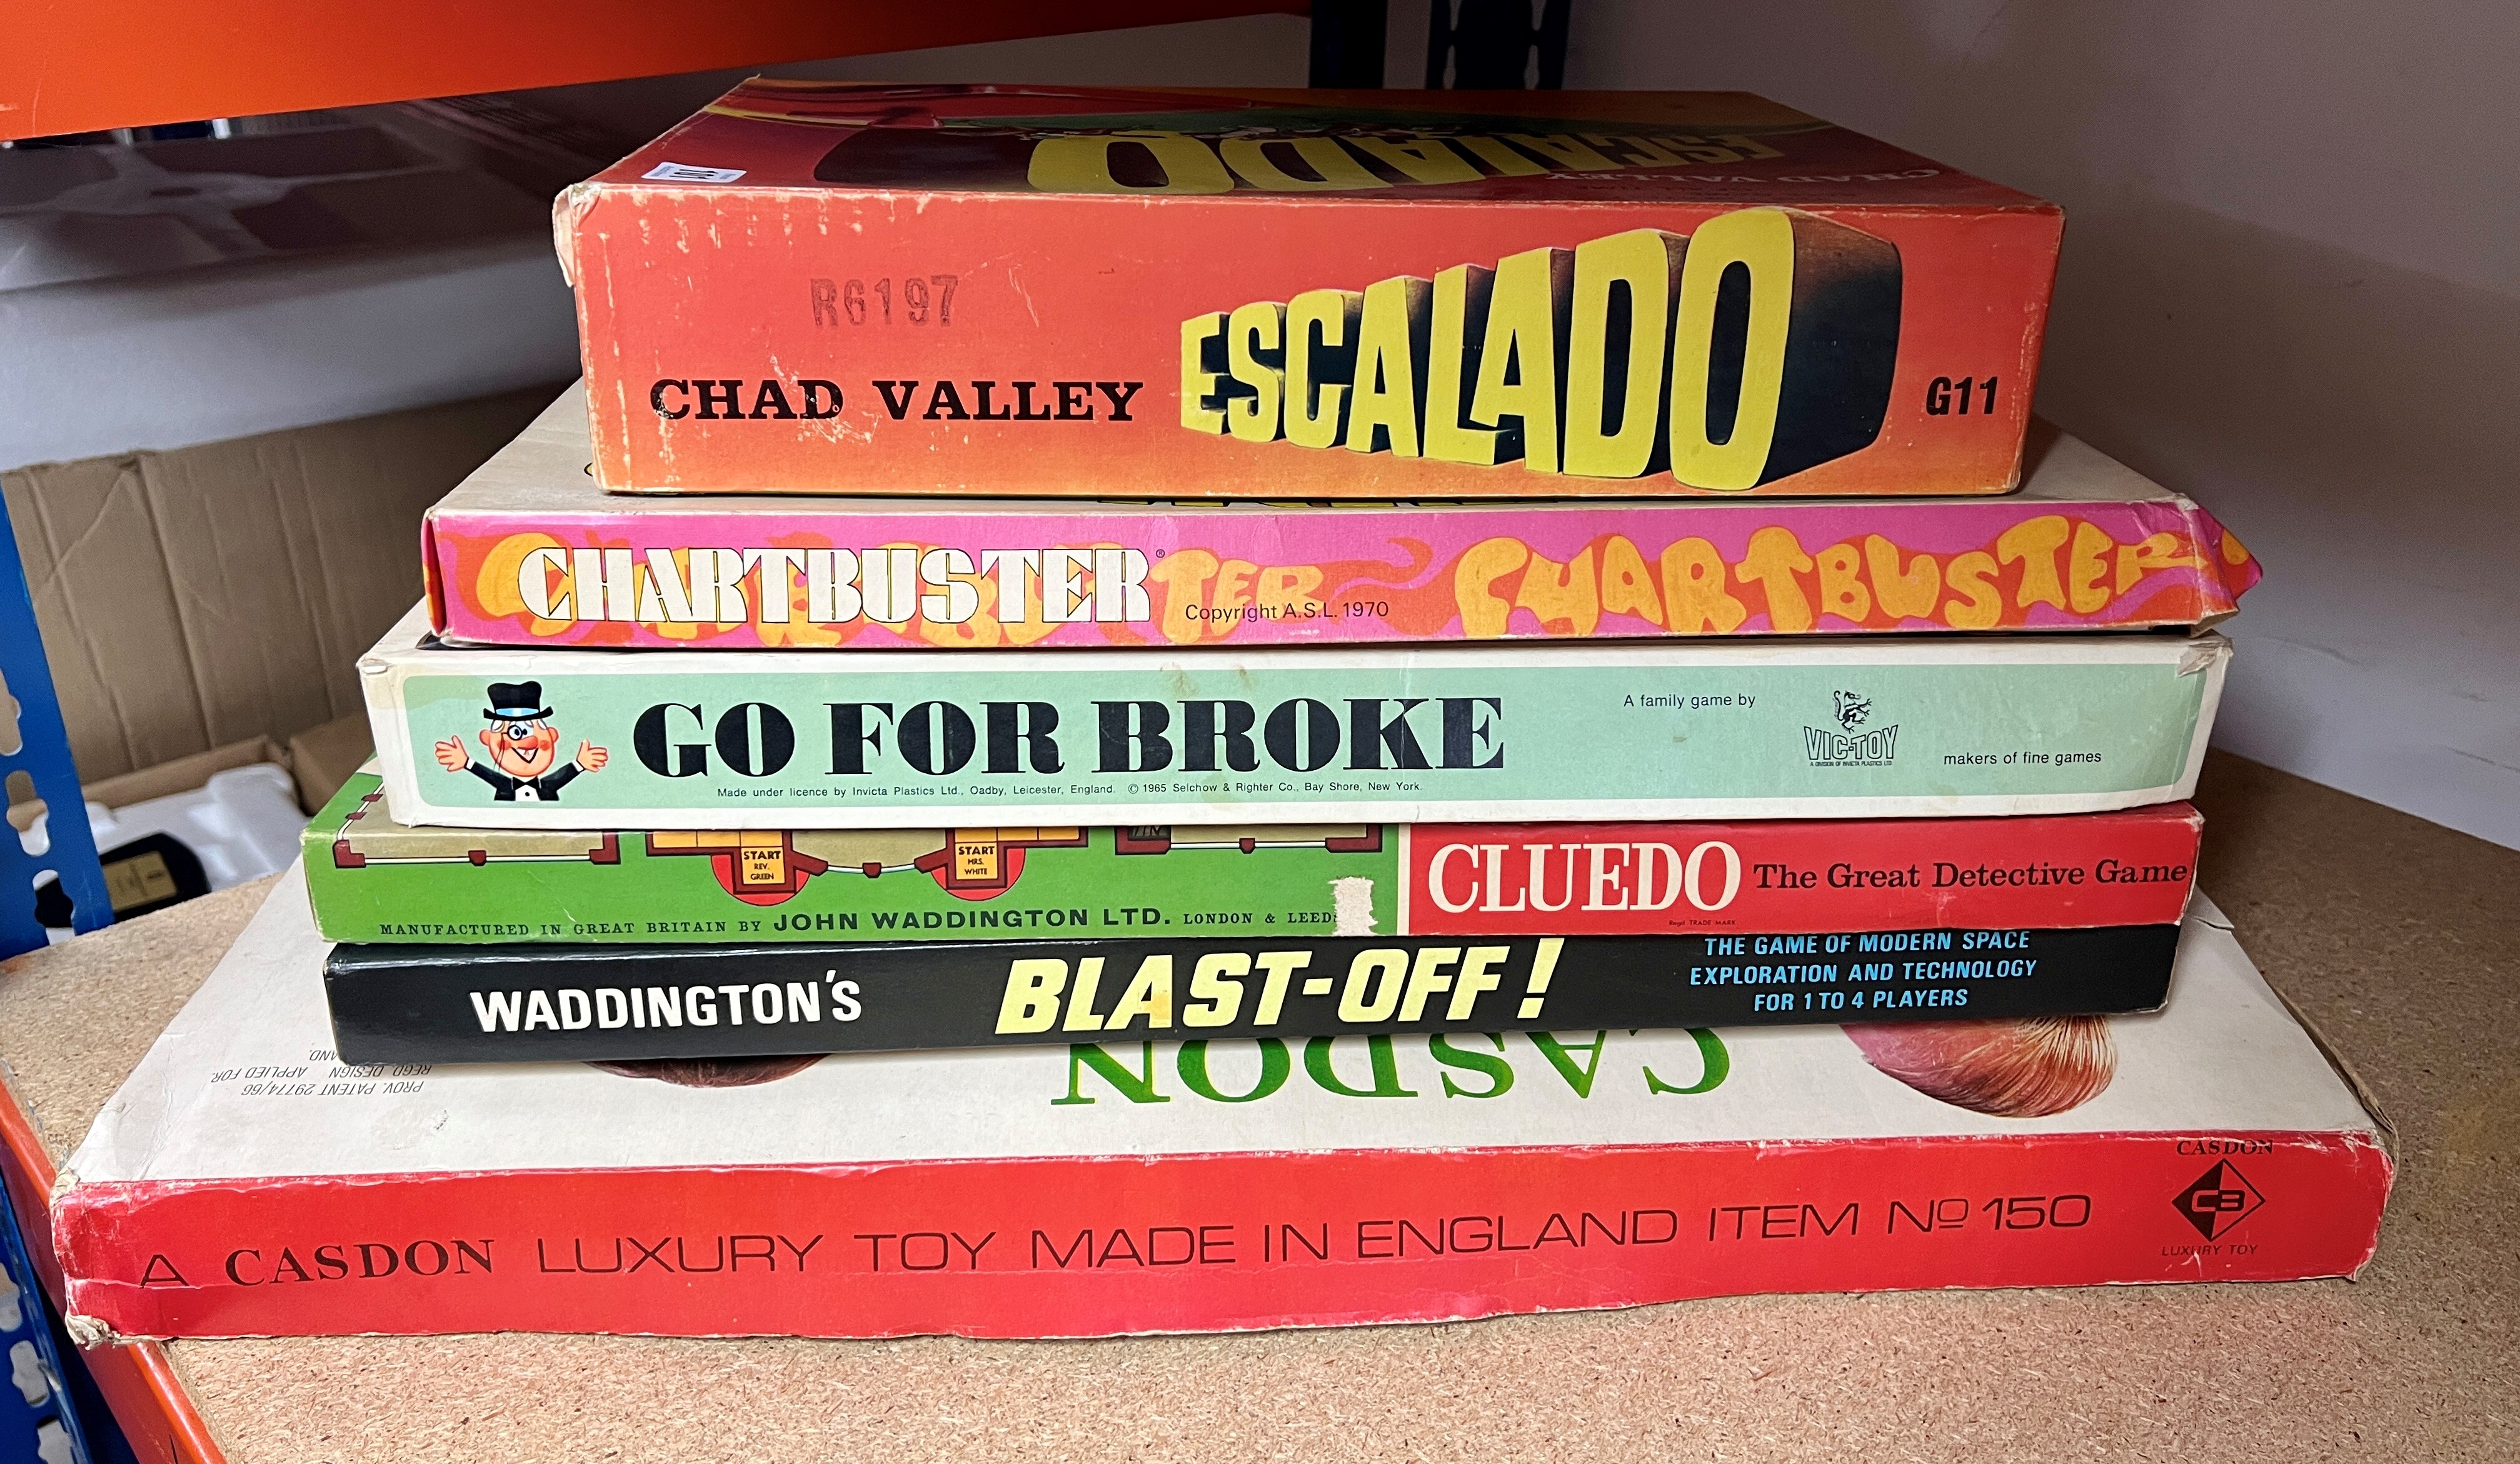 A collection of six vintage board games to include Chad Valley Escalado, Chartbuster, Go For